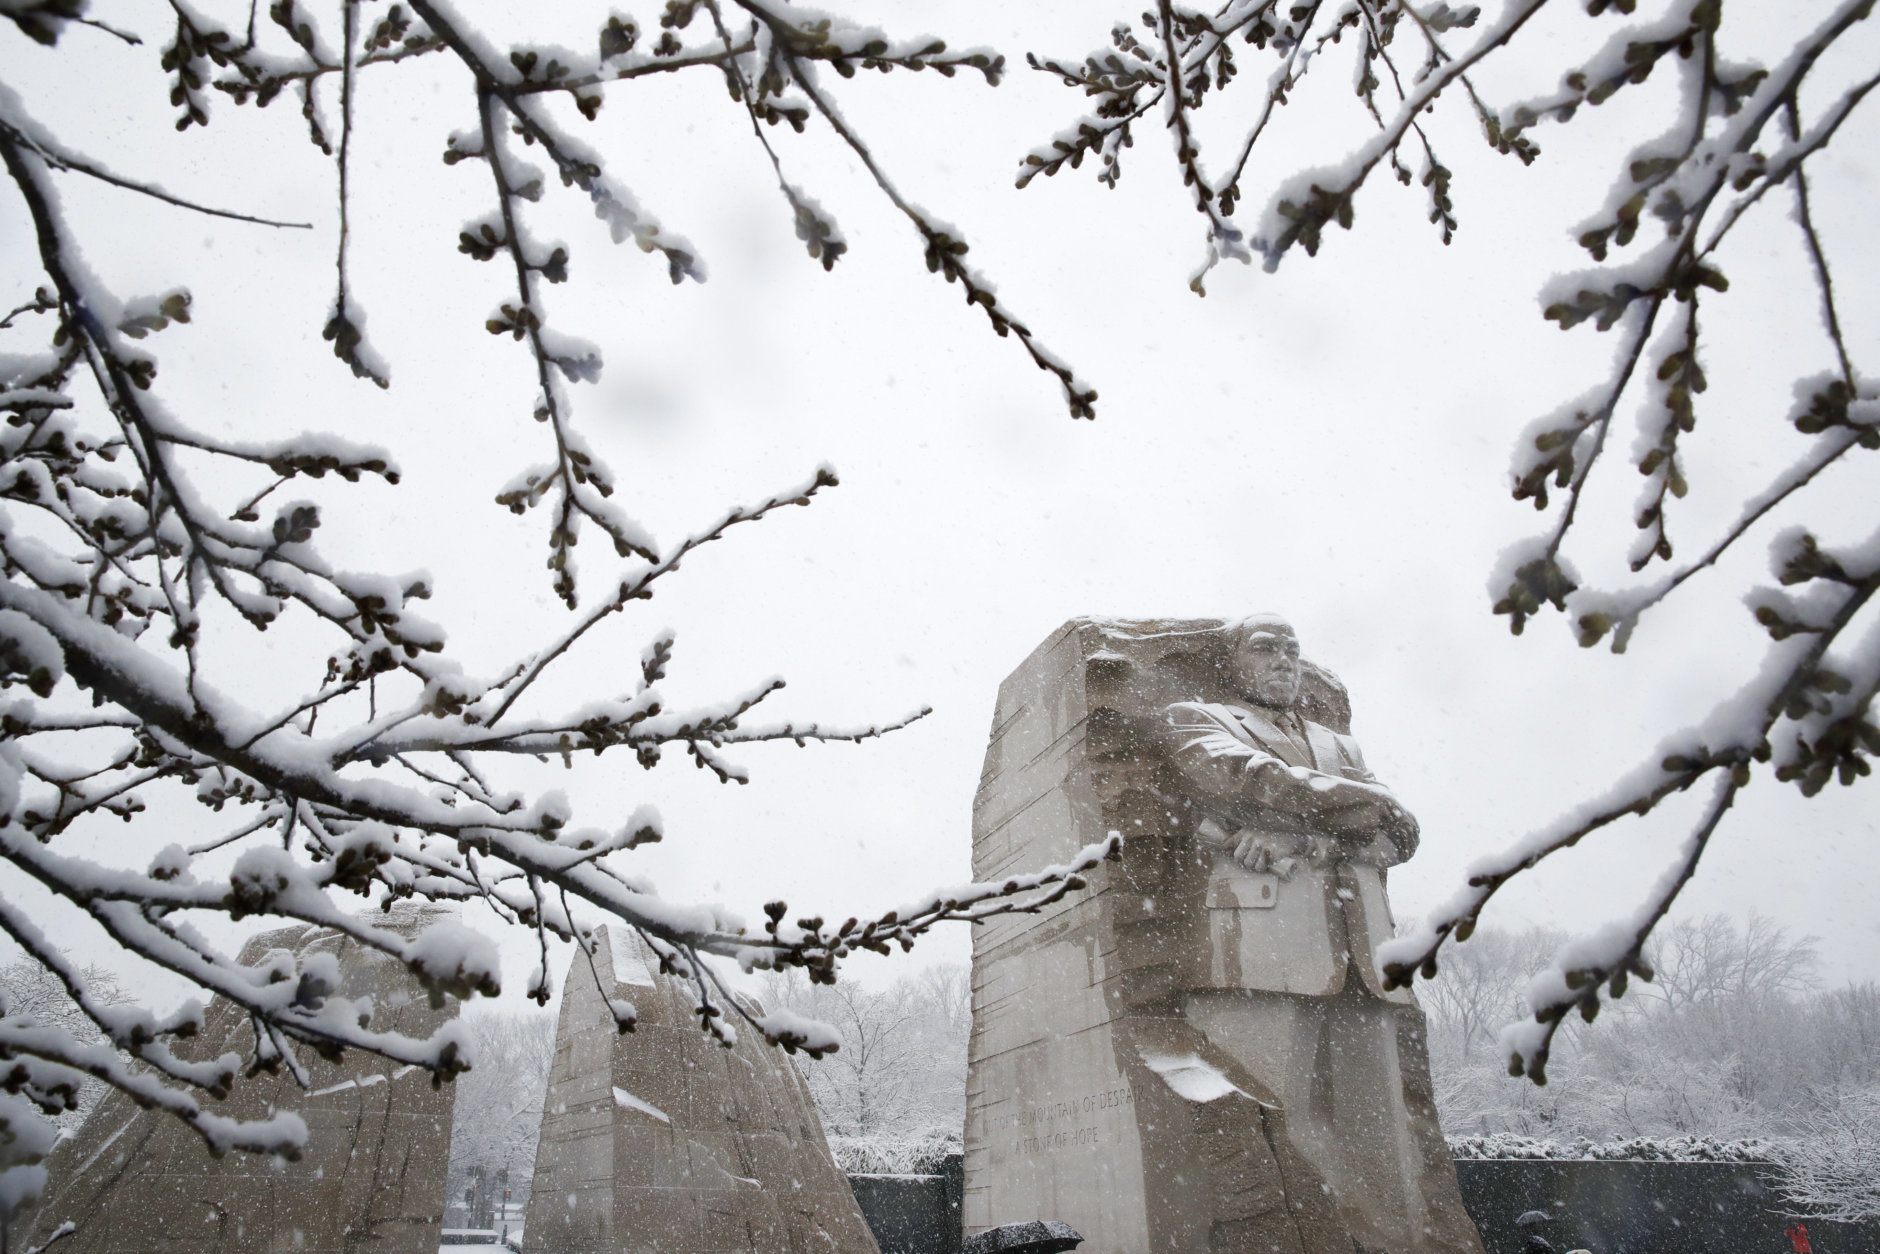 Snow coats cherry blossom trees and the Martin Luther King Jr., Memorial as the snow falls, Wednesday, March 21, 2018, in Washington during a snow storm on the second day of spring. (AP Photo/Jacquelyn Martin)